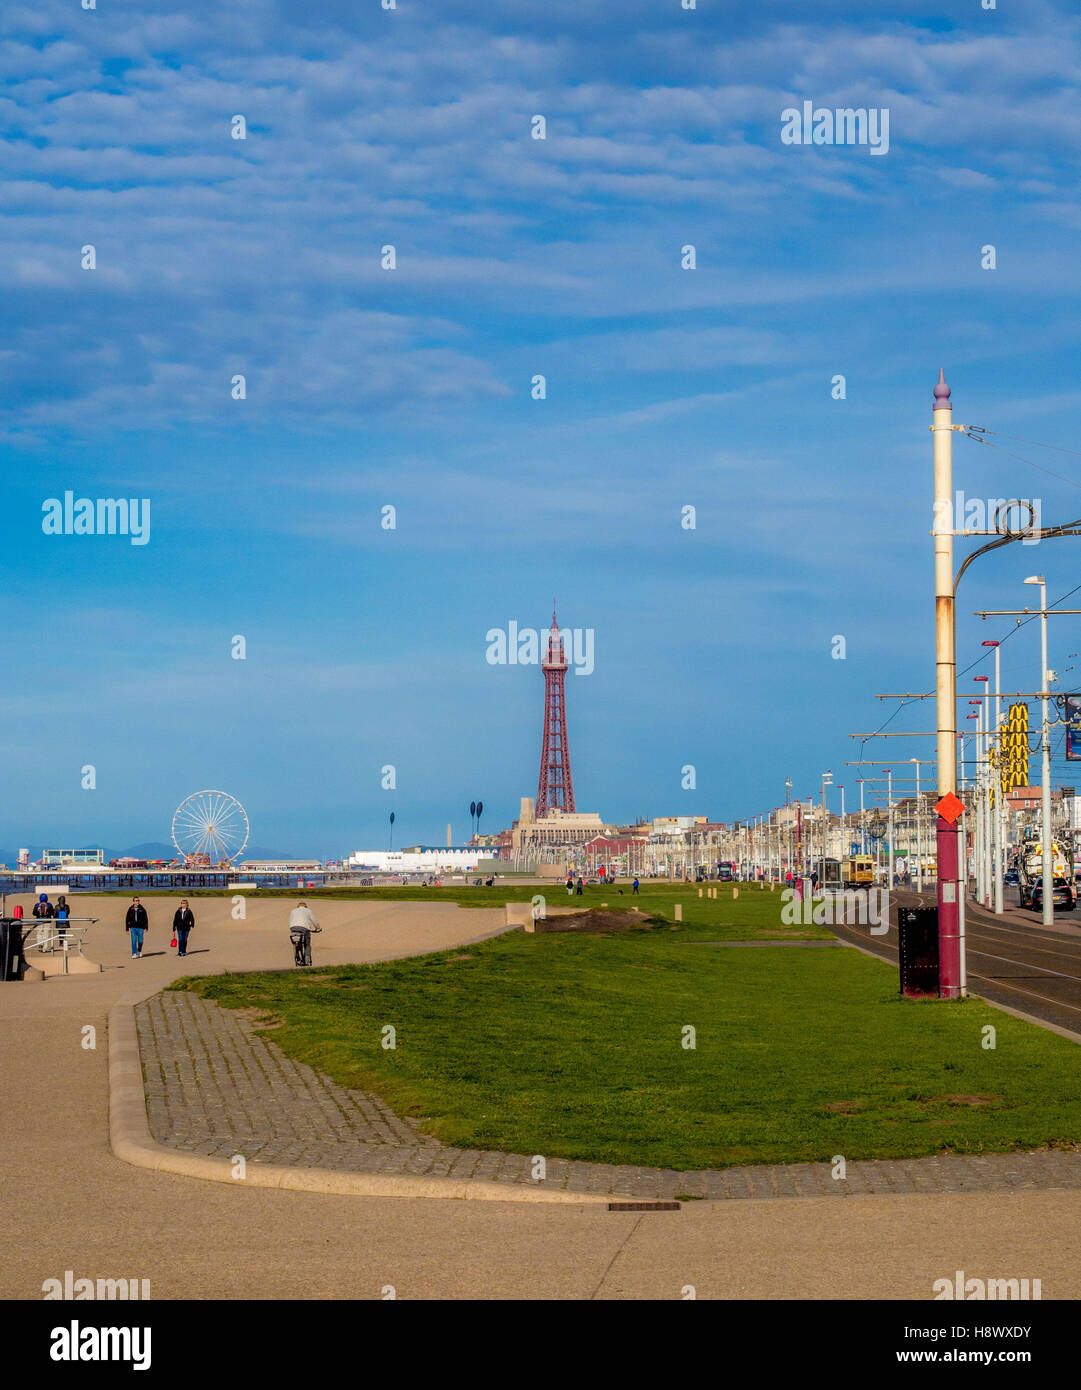 Seafront promenade Tower in distance, Blackpool, Lancashire, UK. Stock Photo